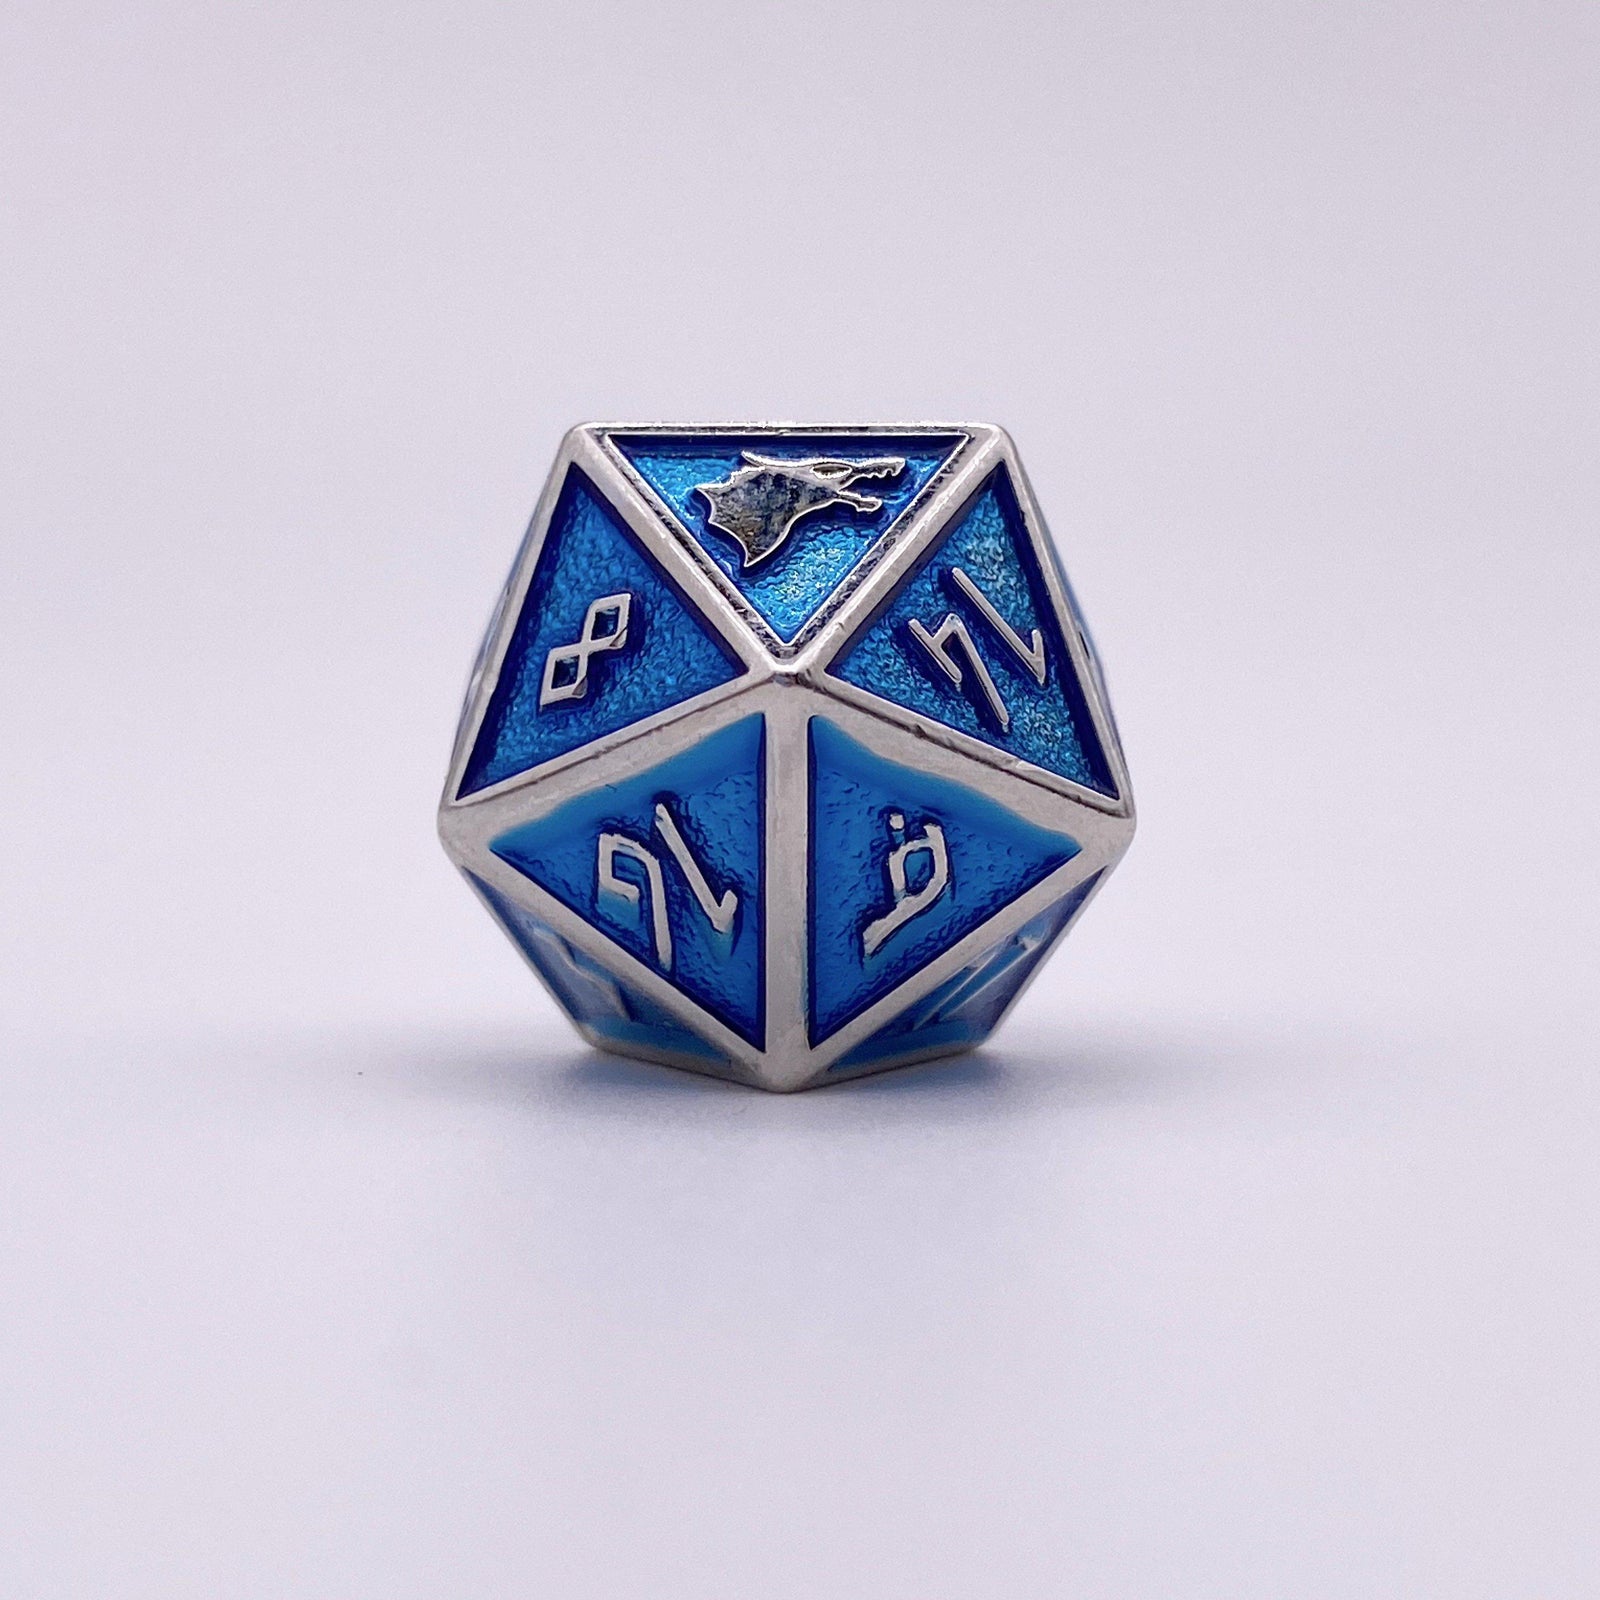 Single Alloy D20 in Vaporal Blade by Norse Foundry - NOR 04568